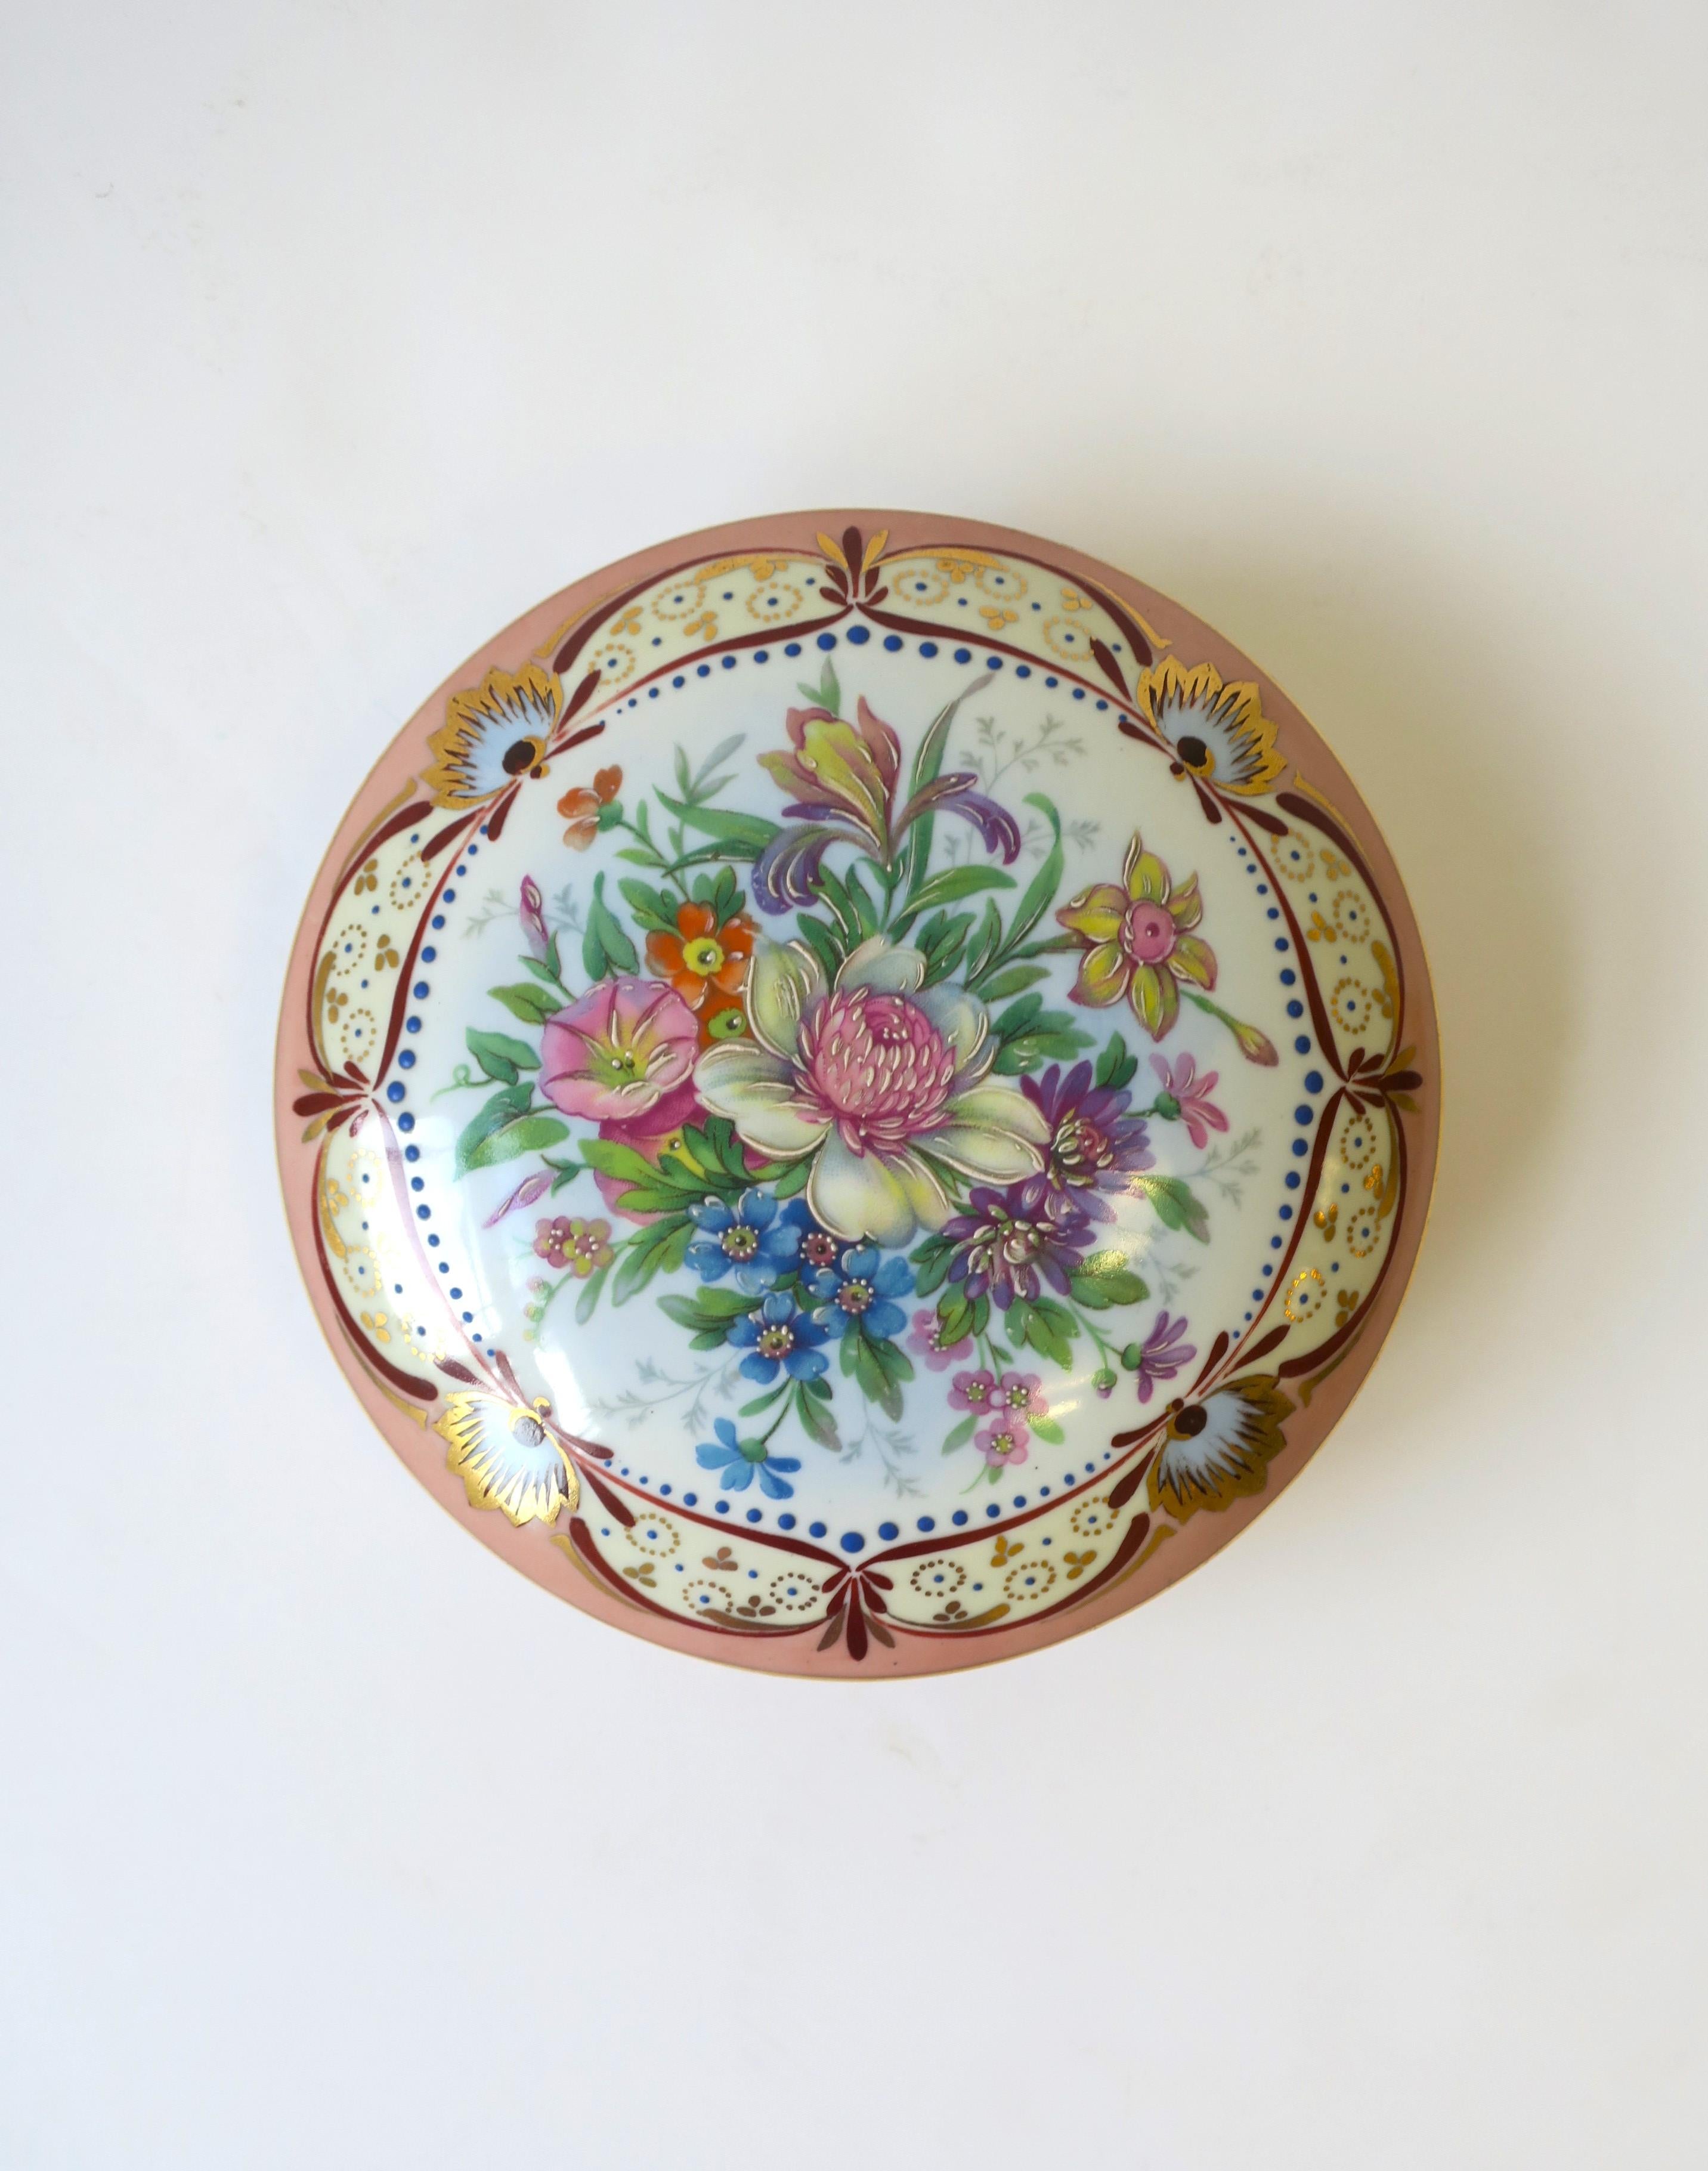 A French porcelain jewelry box with flower and leaf design and touch of gold detail, circa mid-20th century, France. A great piece for any vanity, dressing area, bathroom, closet, etc. Marked 'France' on underside as shown. Box is a nice size.